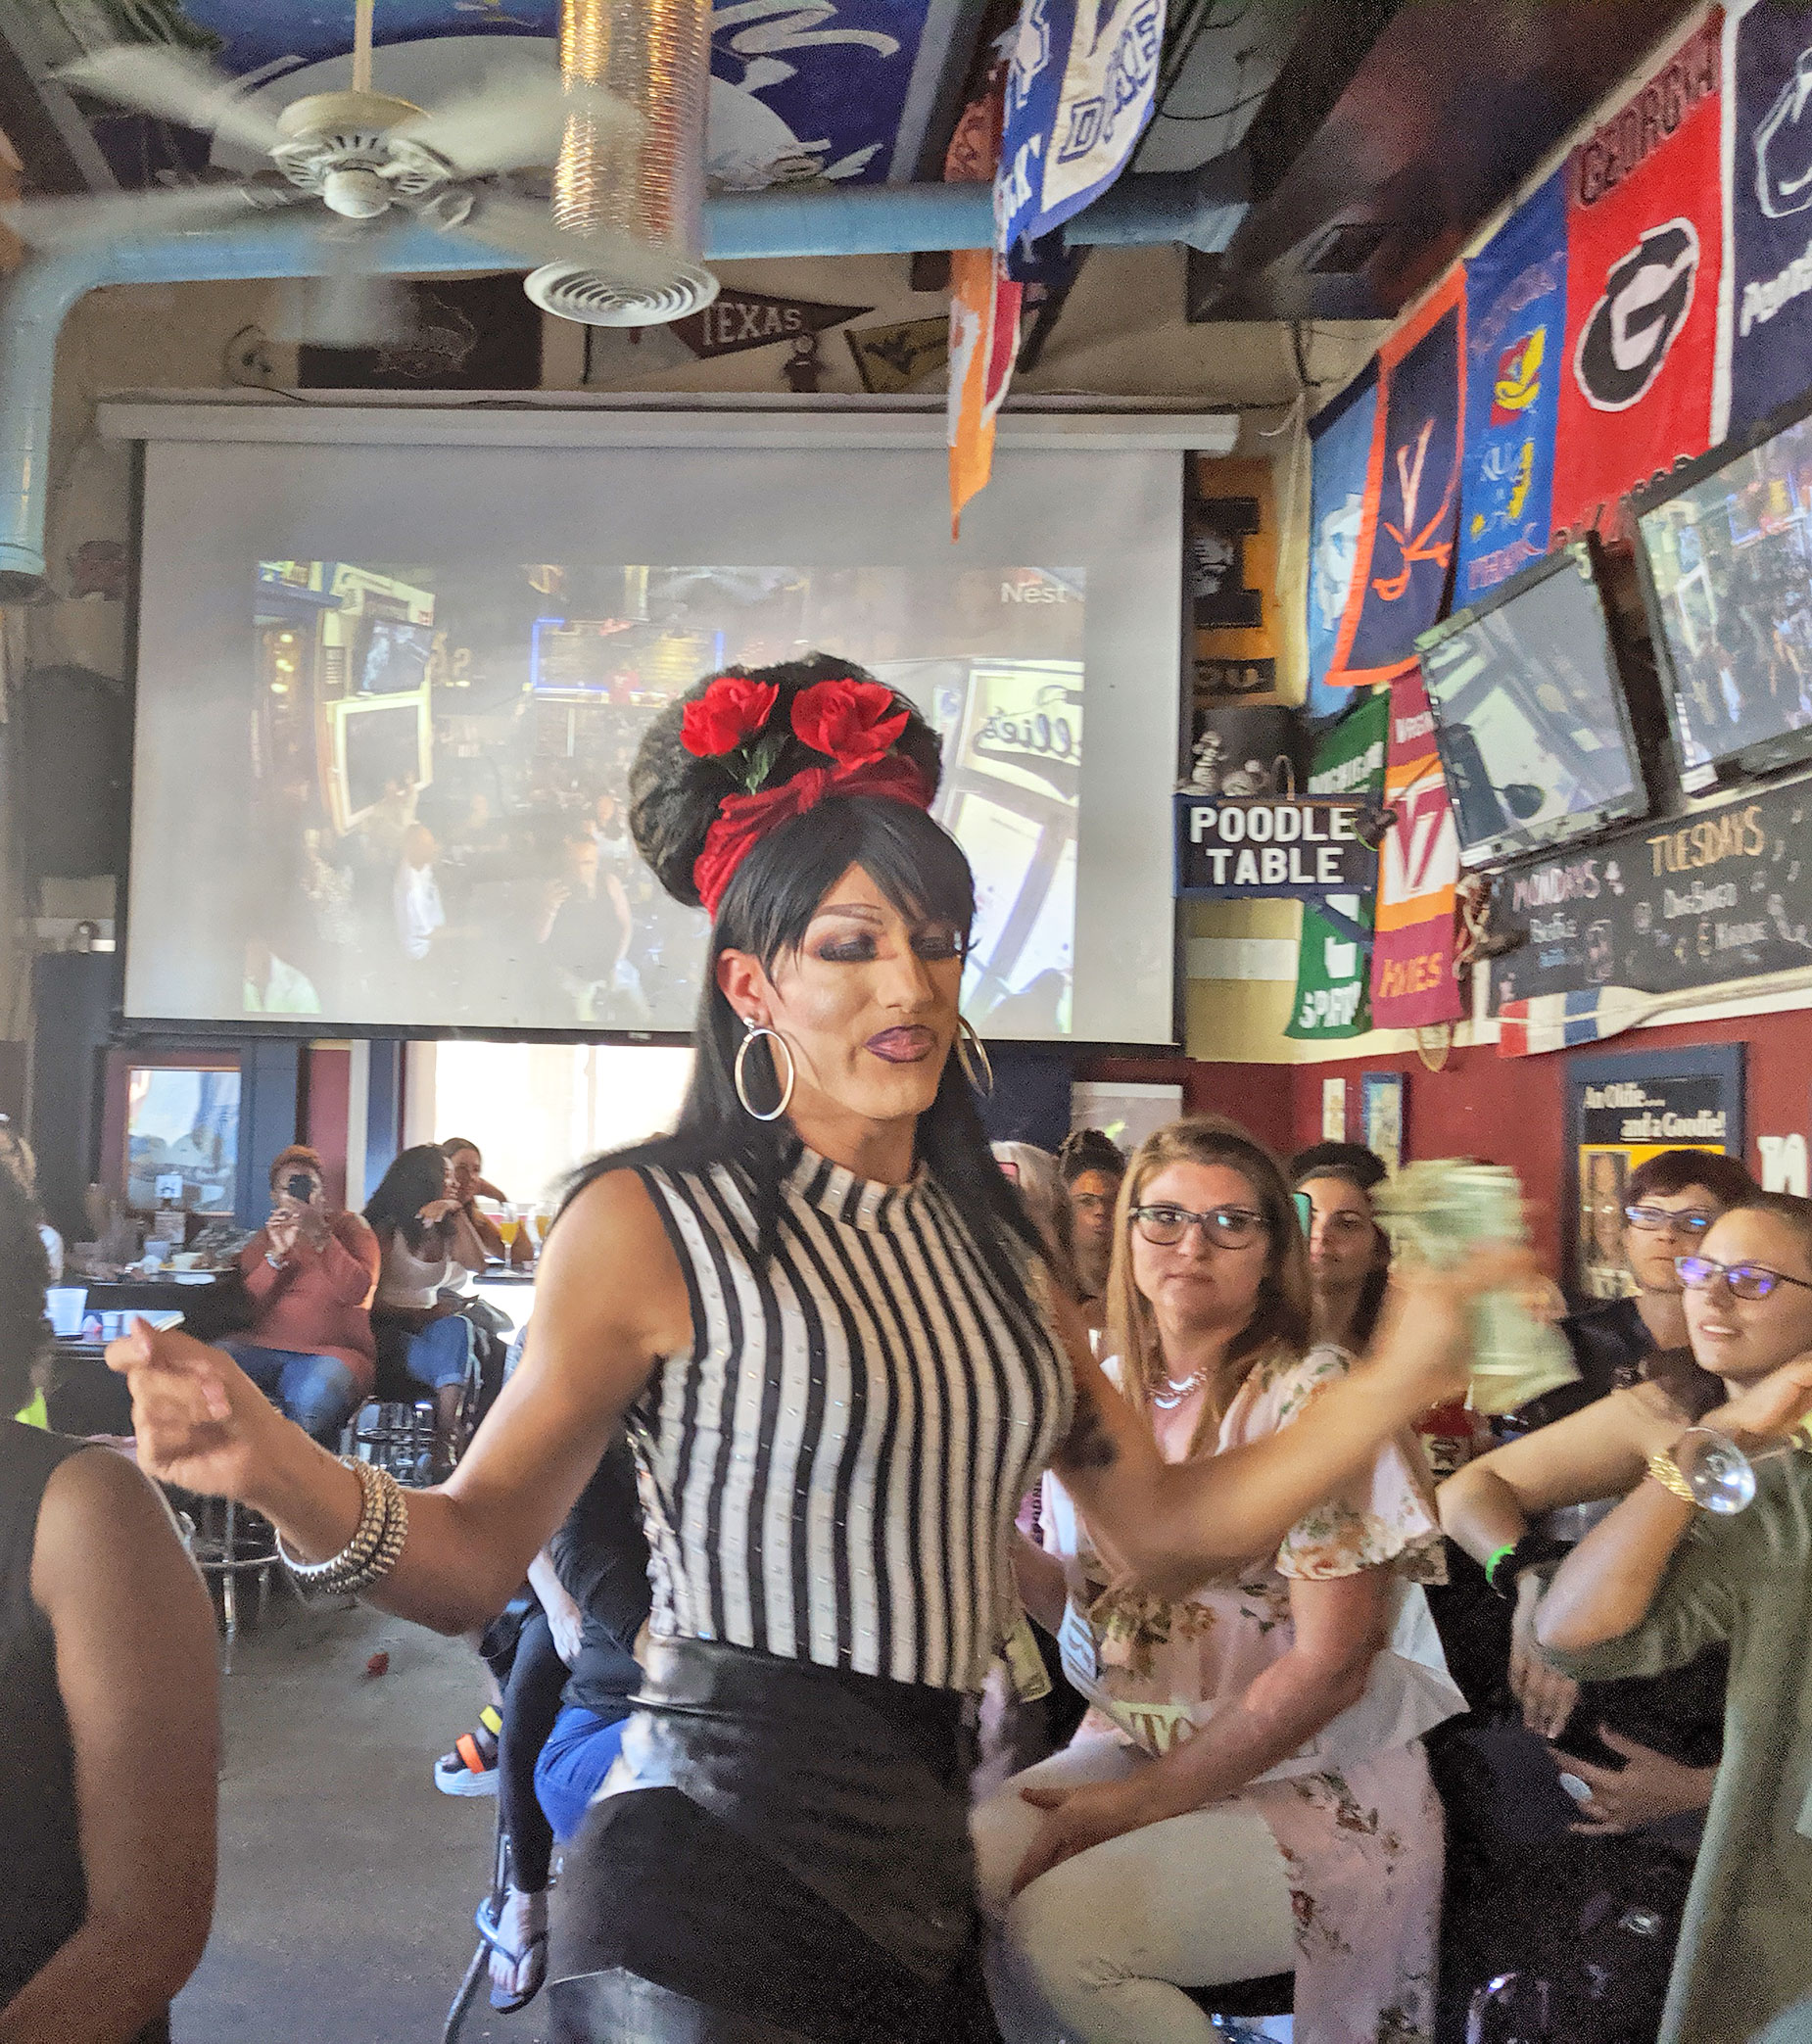 Celestia Cox performing at Nellie's Sports Bar drag brunch.